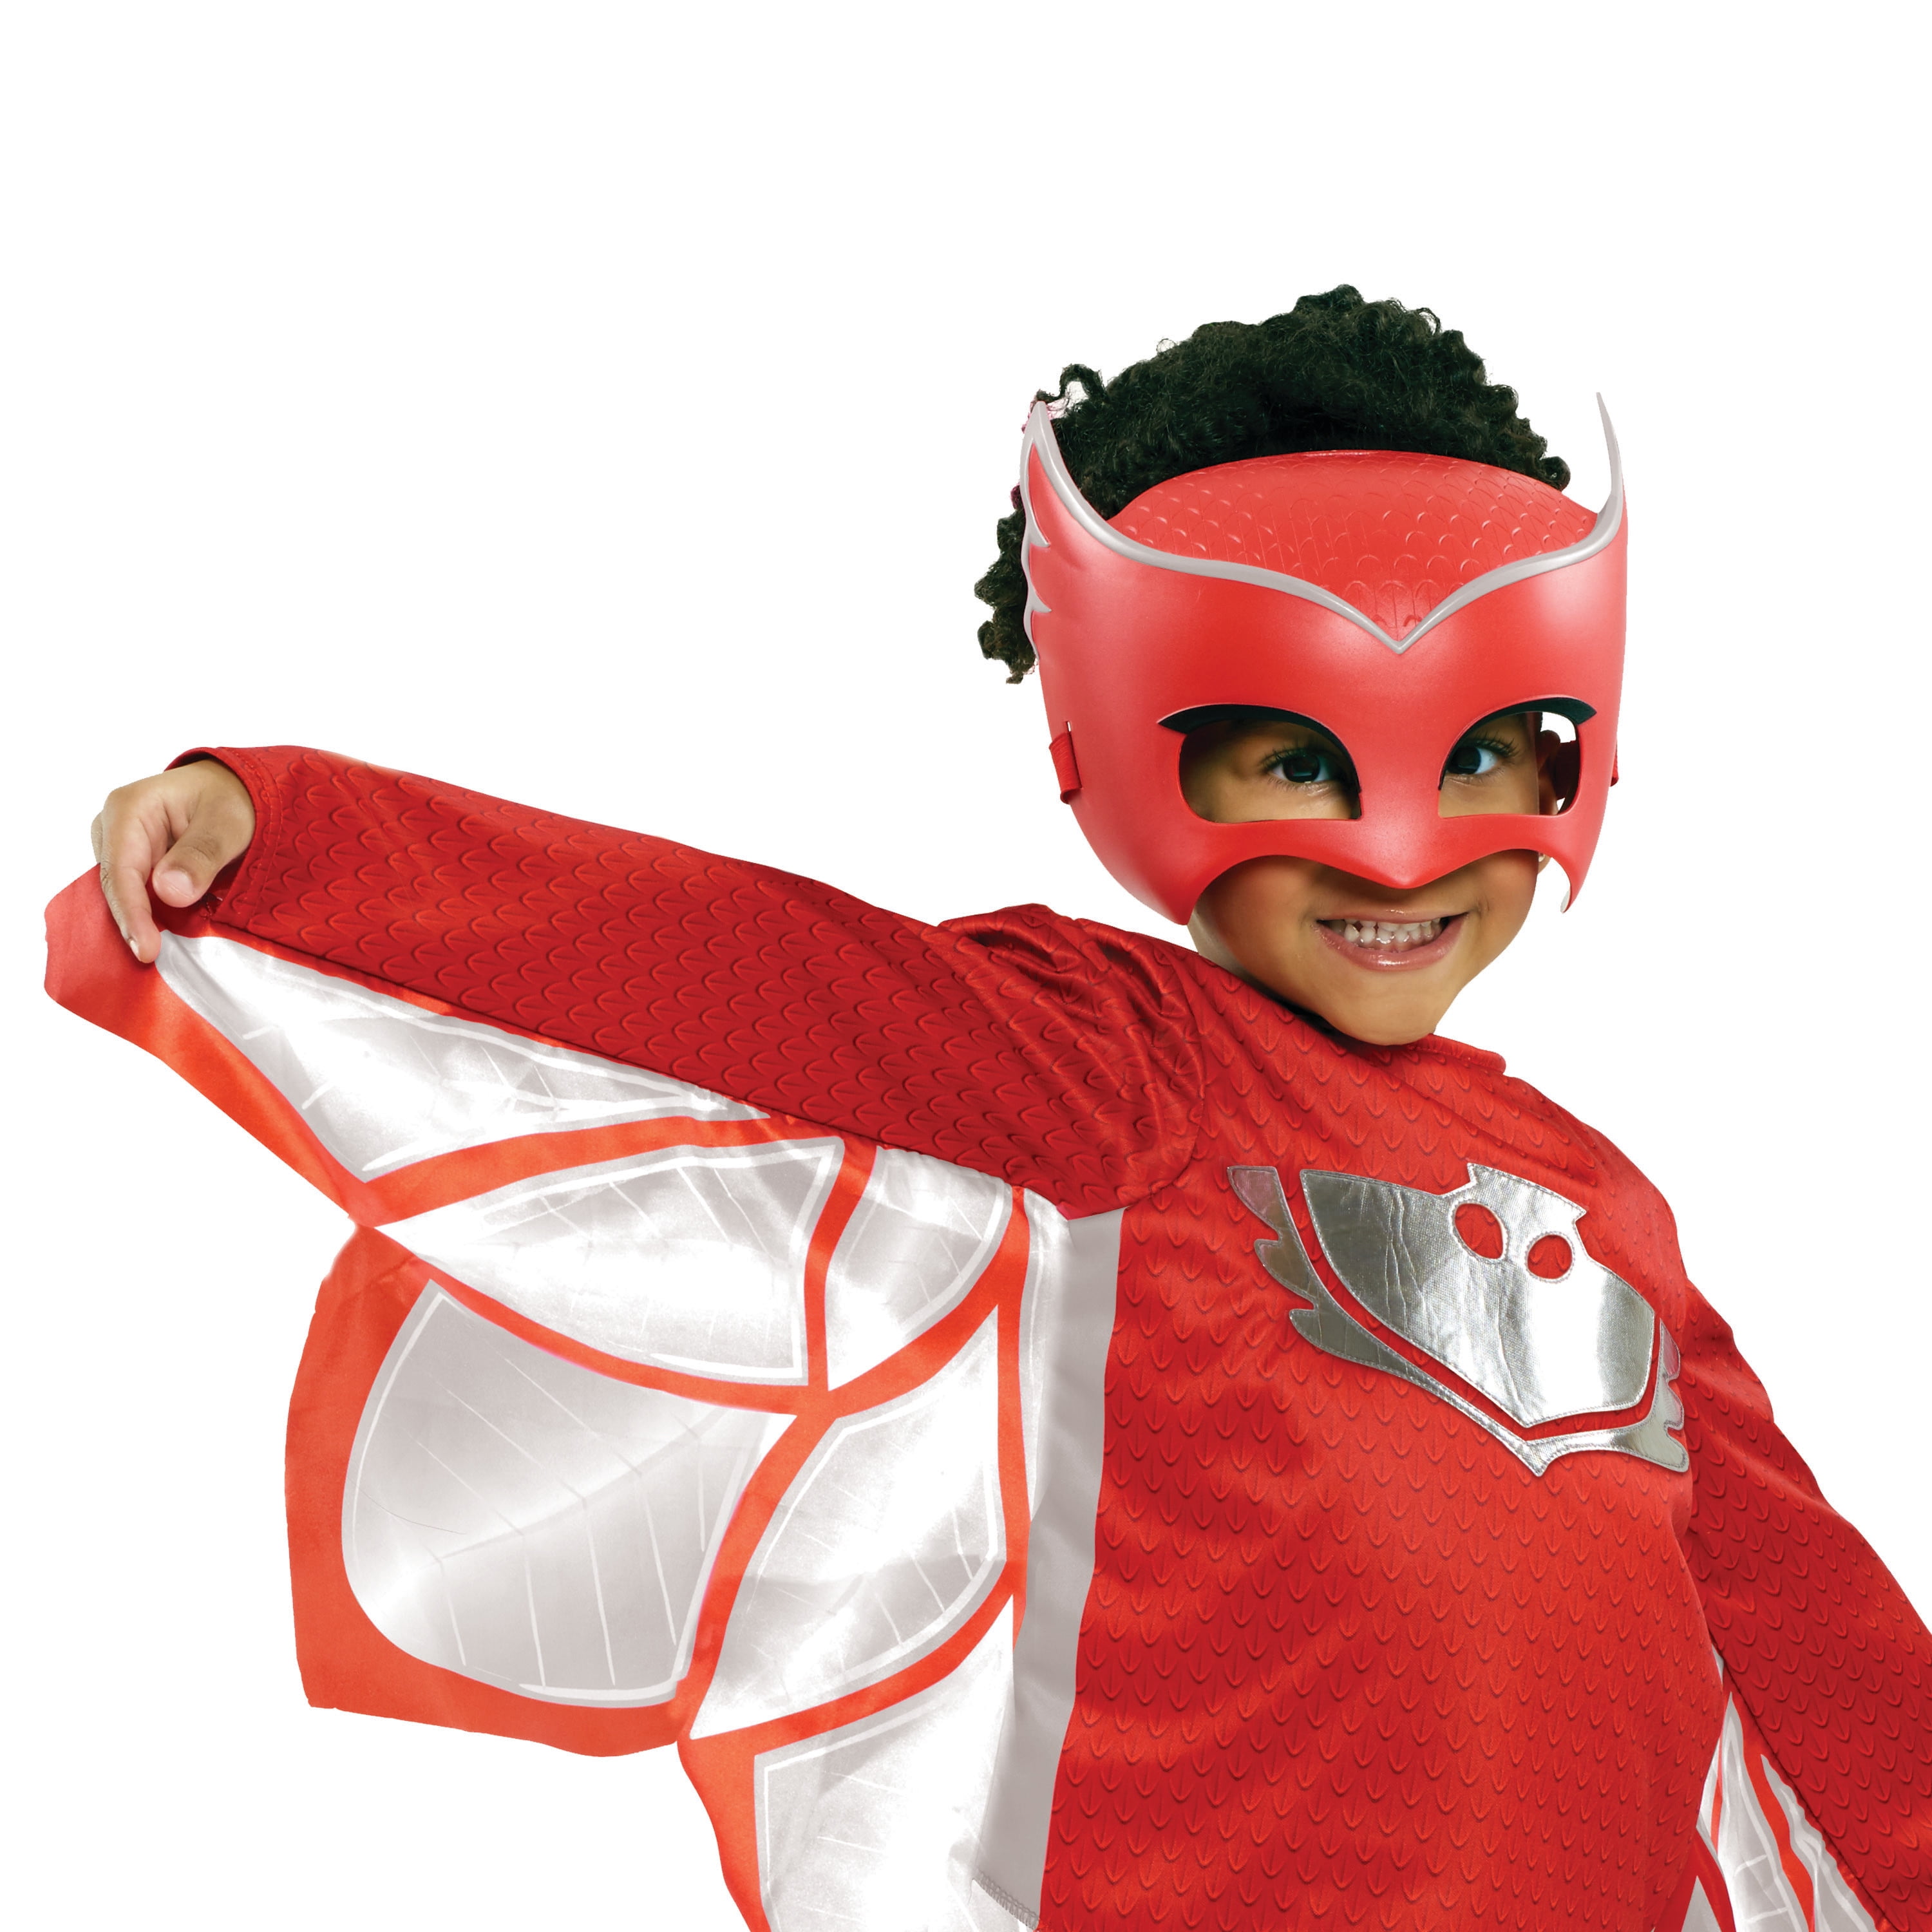 Toddler Size Large 4-6x PJ Masks Owlette Costume Deluxe Kids Light Up Jumpsuit Outfit and Character Mask